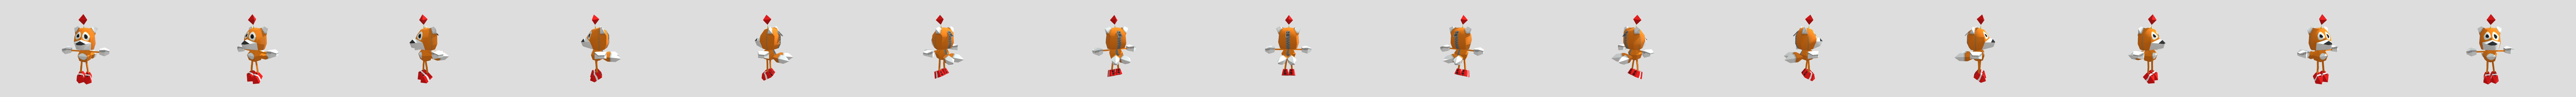 PC / Computer - Sonic R - Tails Doll - The Models Resource